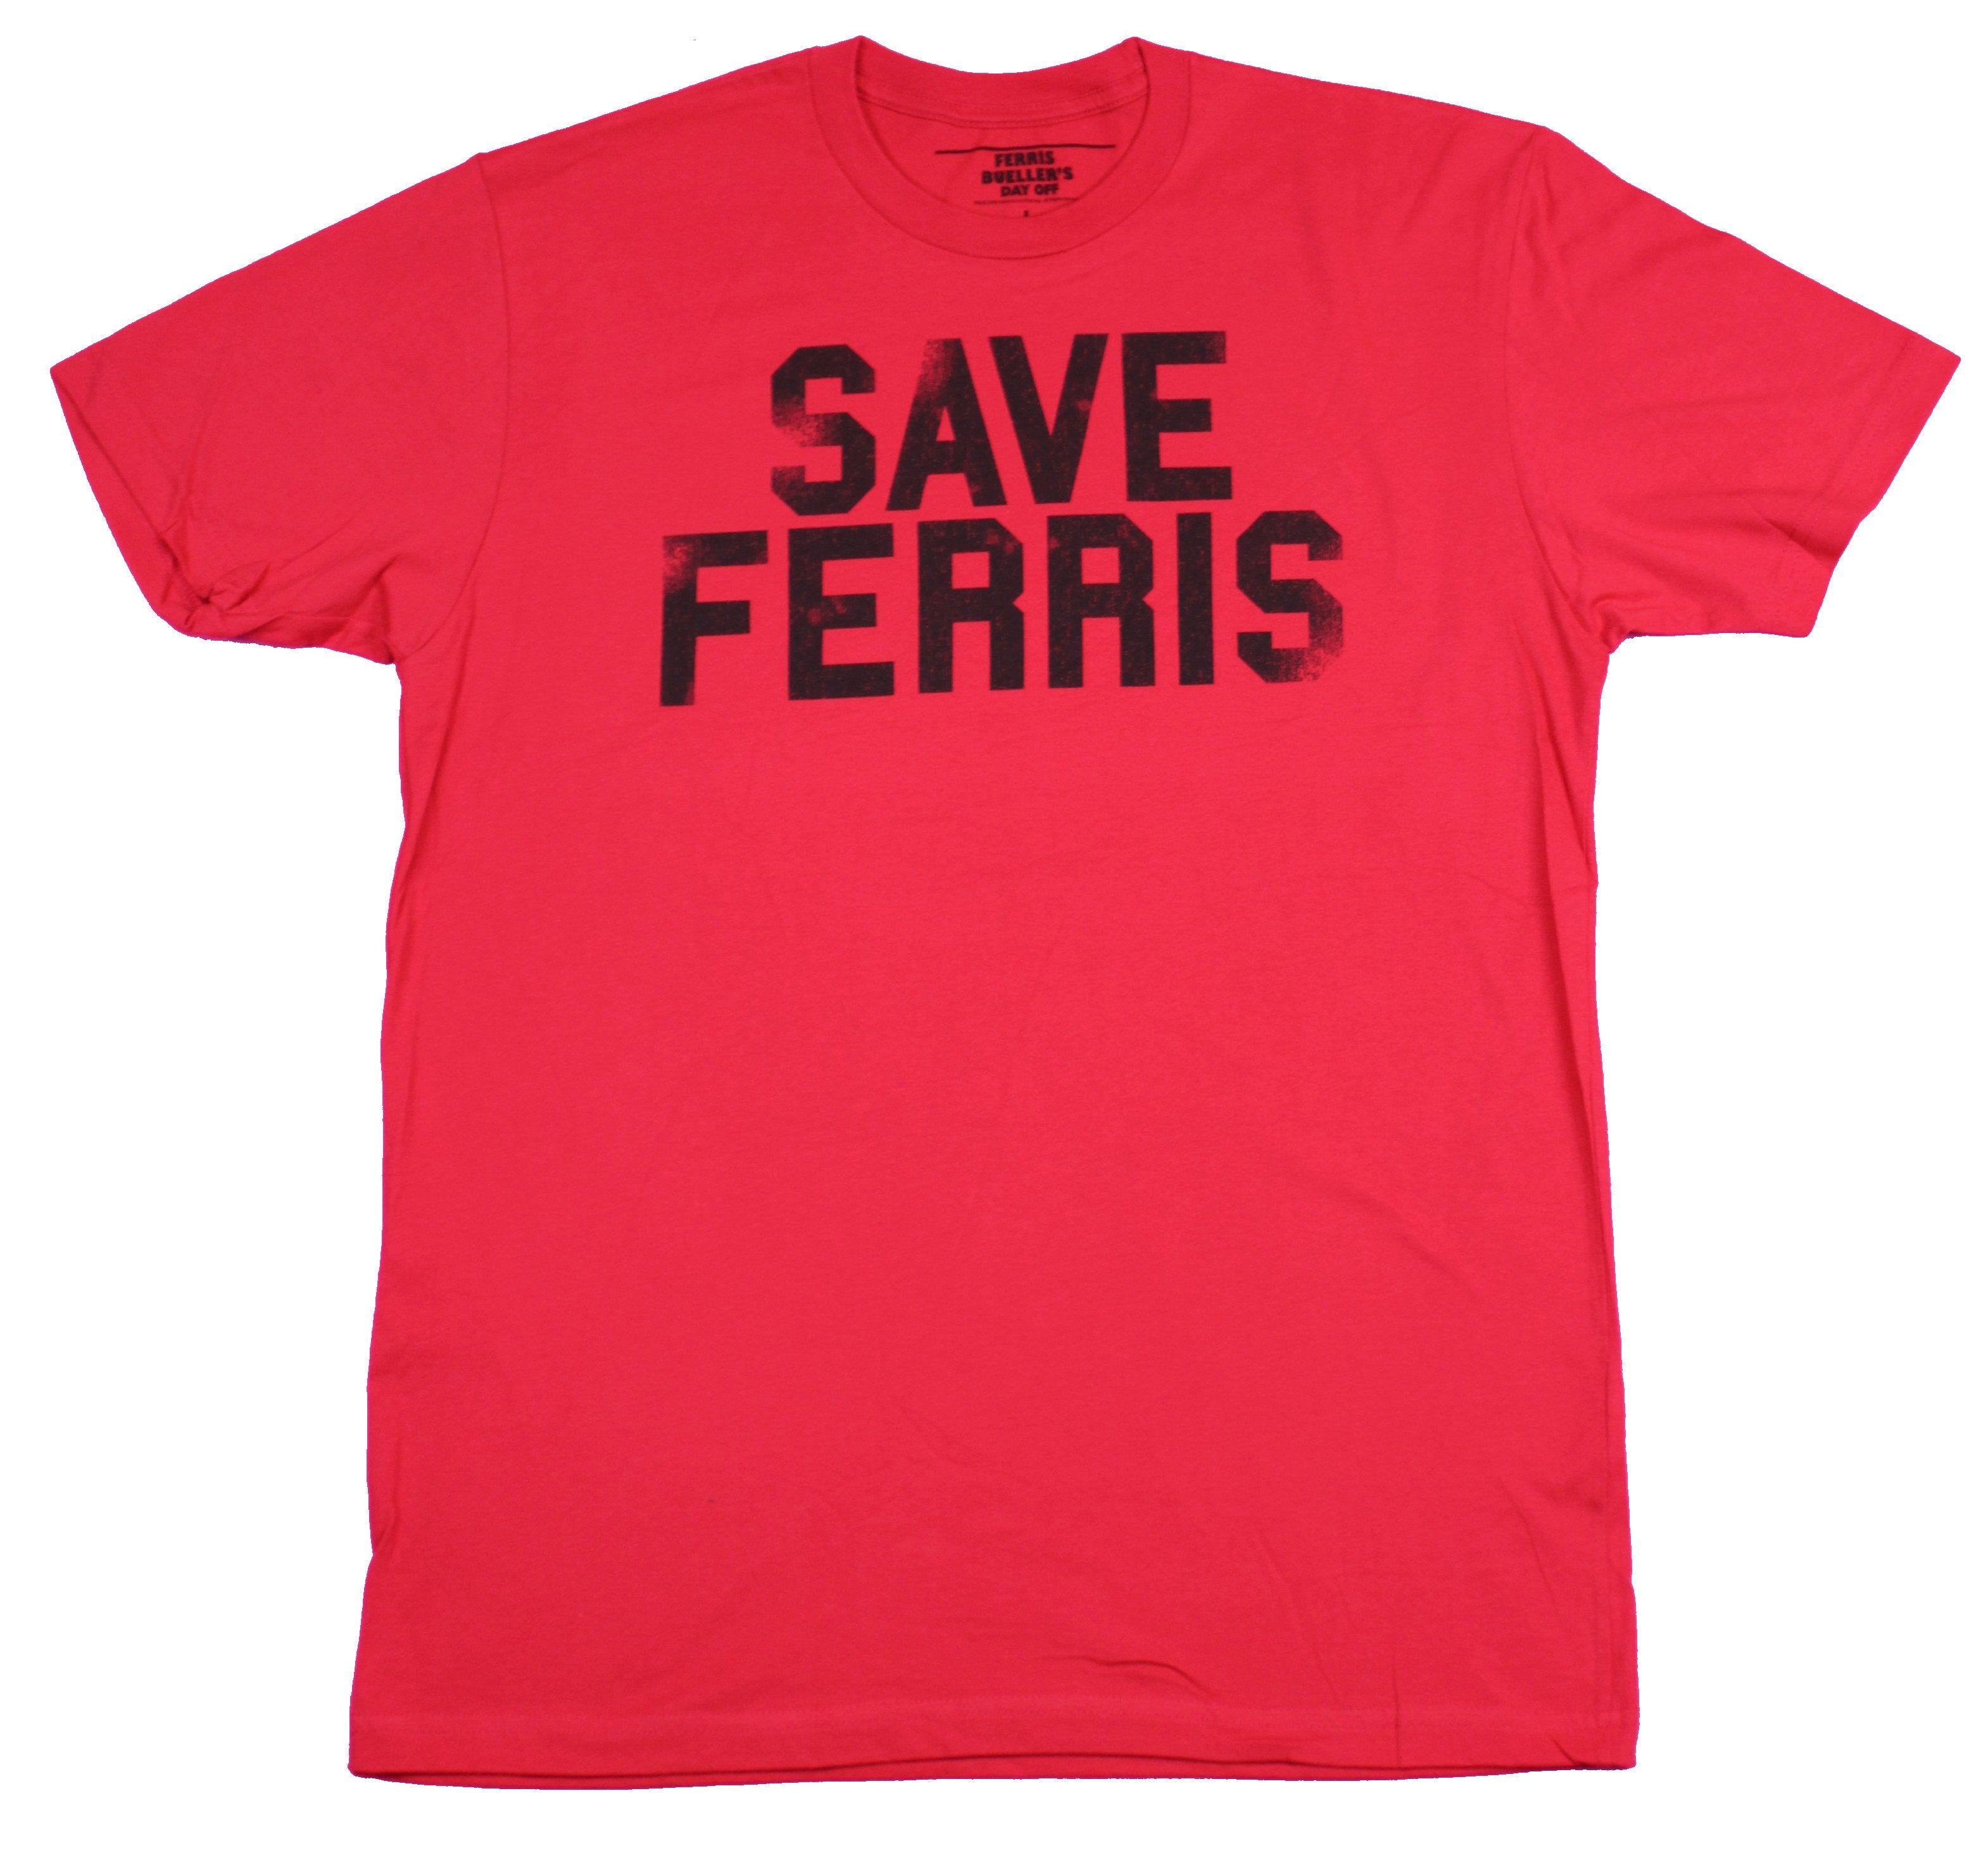 Ferris Bueller's Day Off  Mens T-Shirt  - Distressed Save Ferris Image